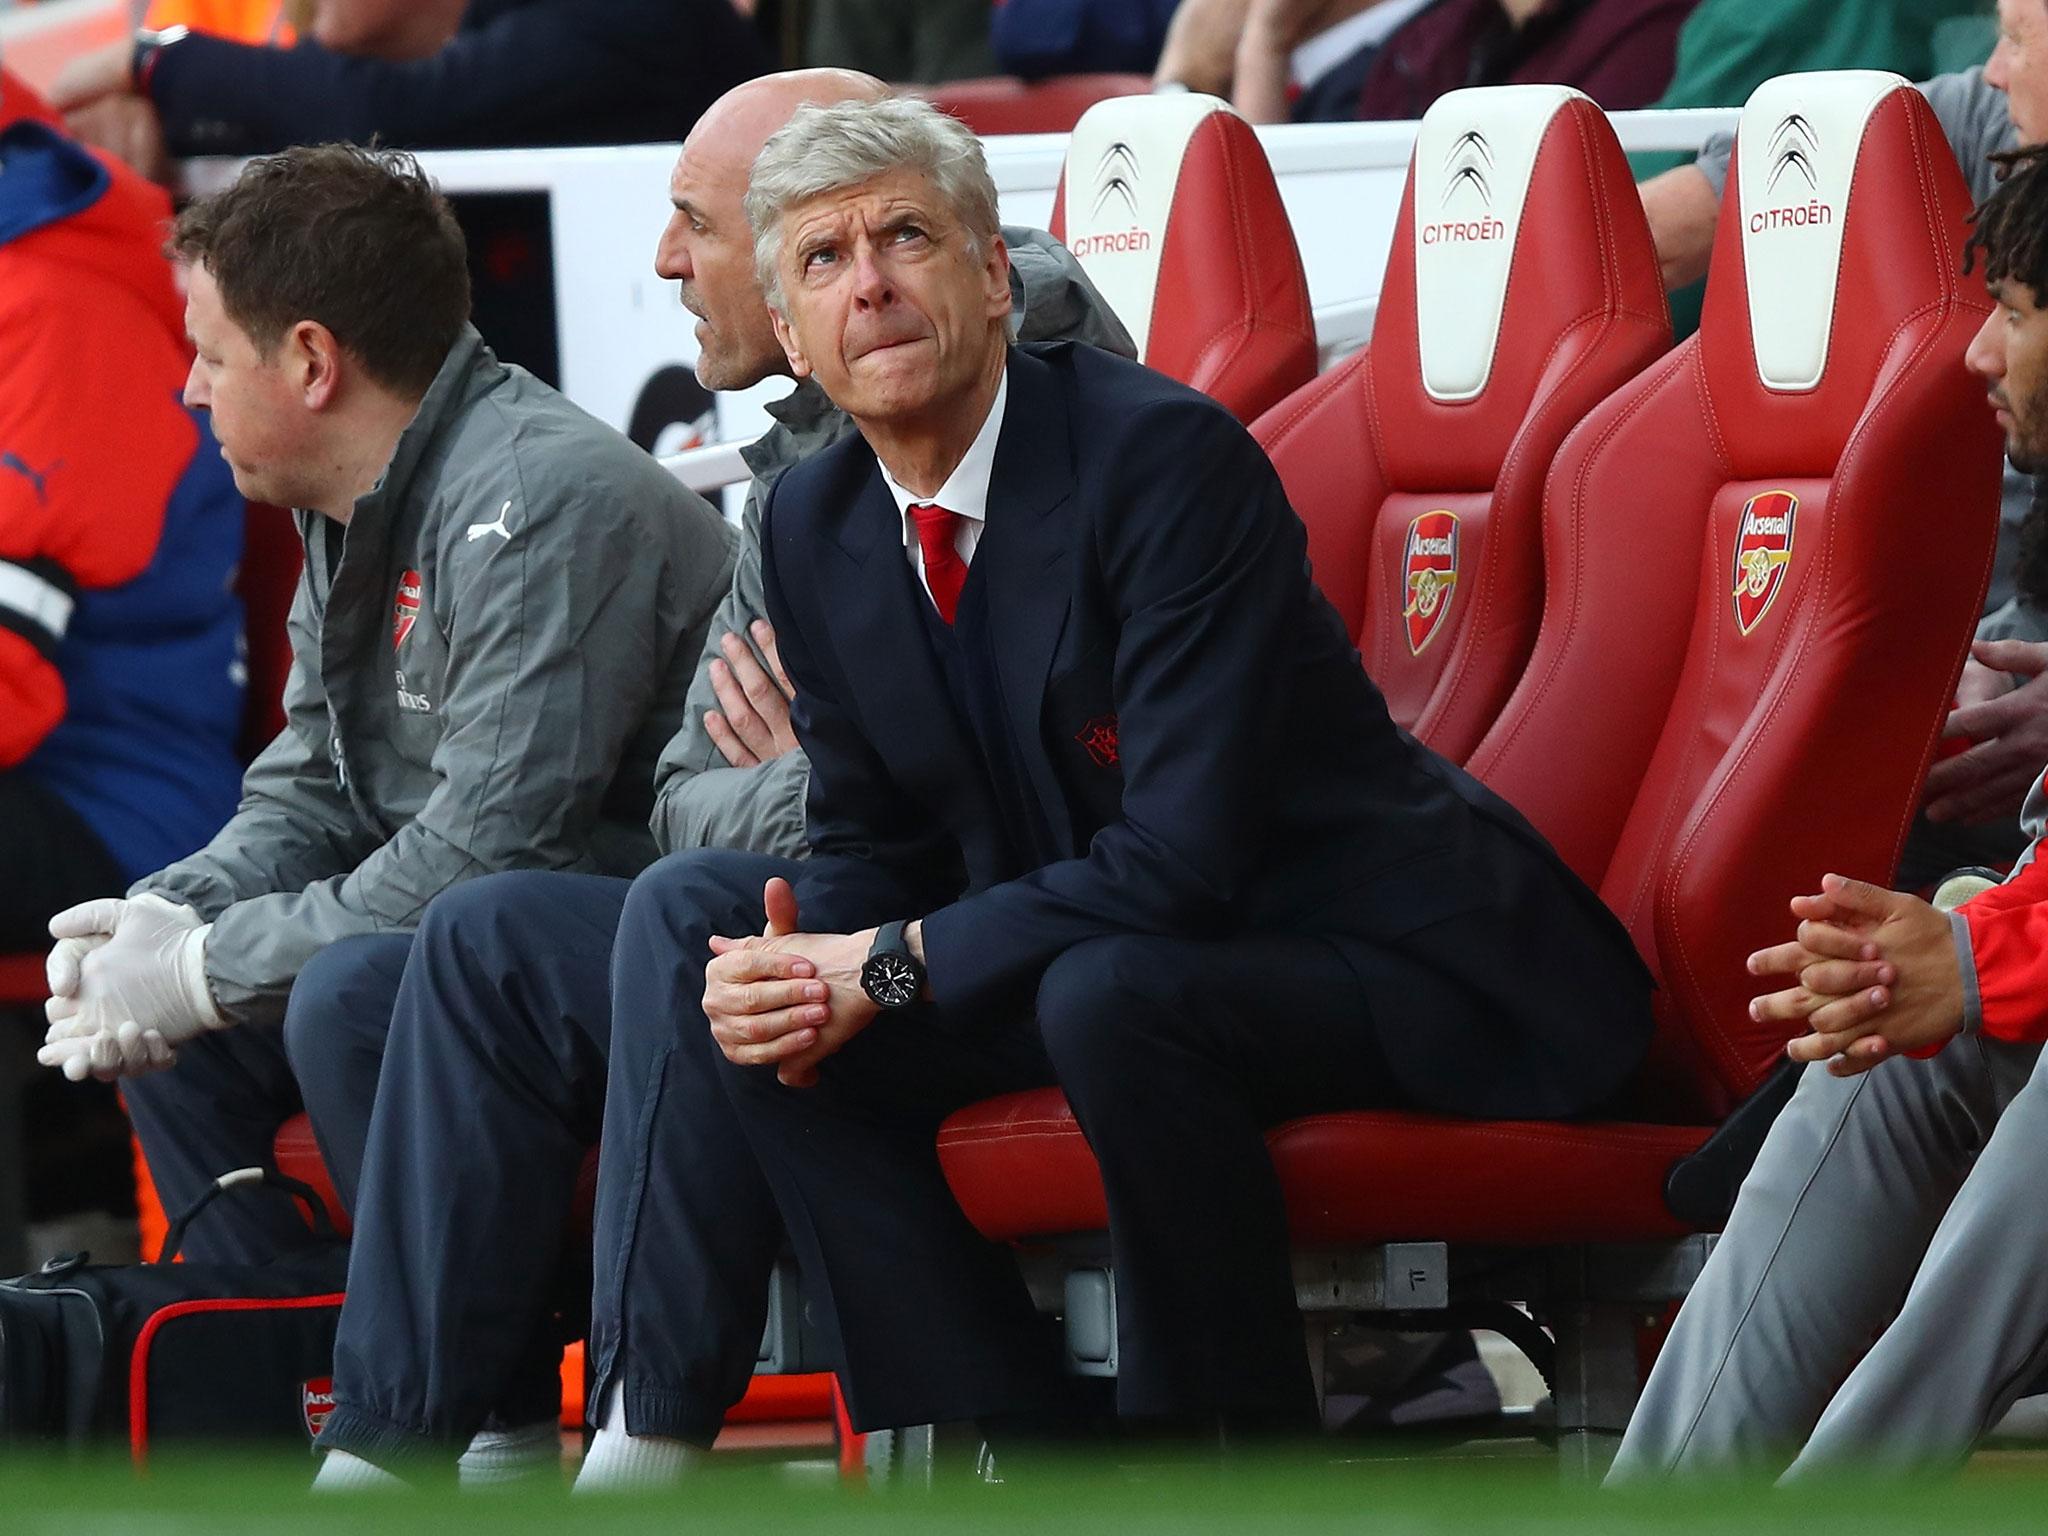 Arsene Wenger is keeping his cards close to his chest regarding his future